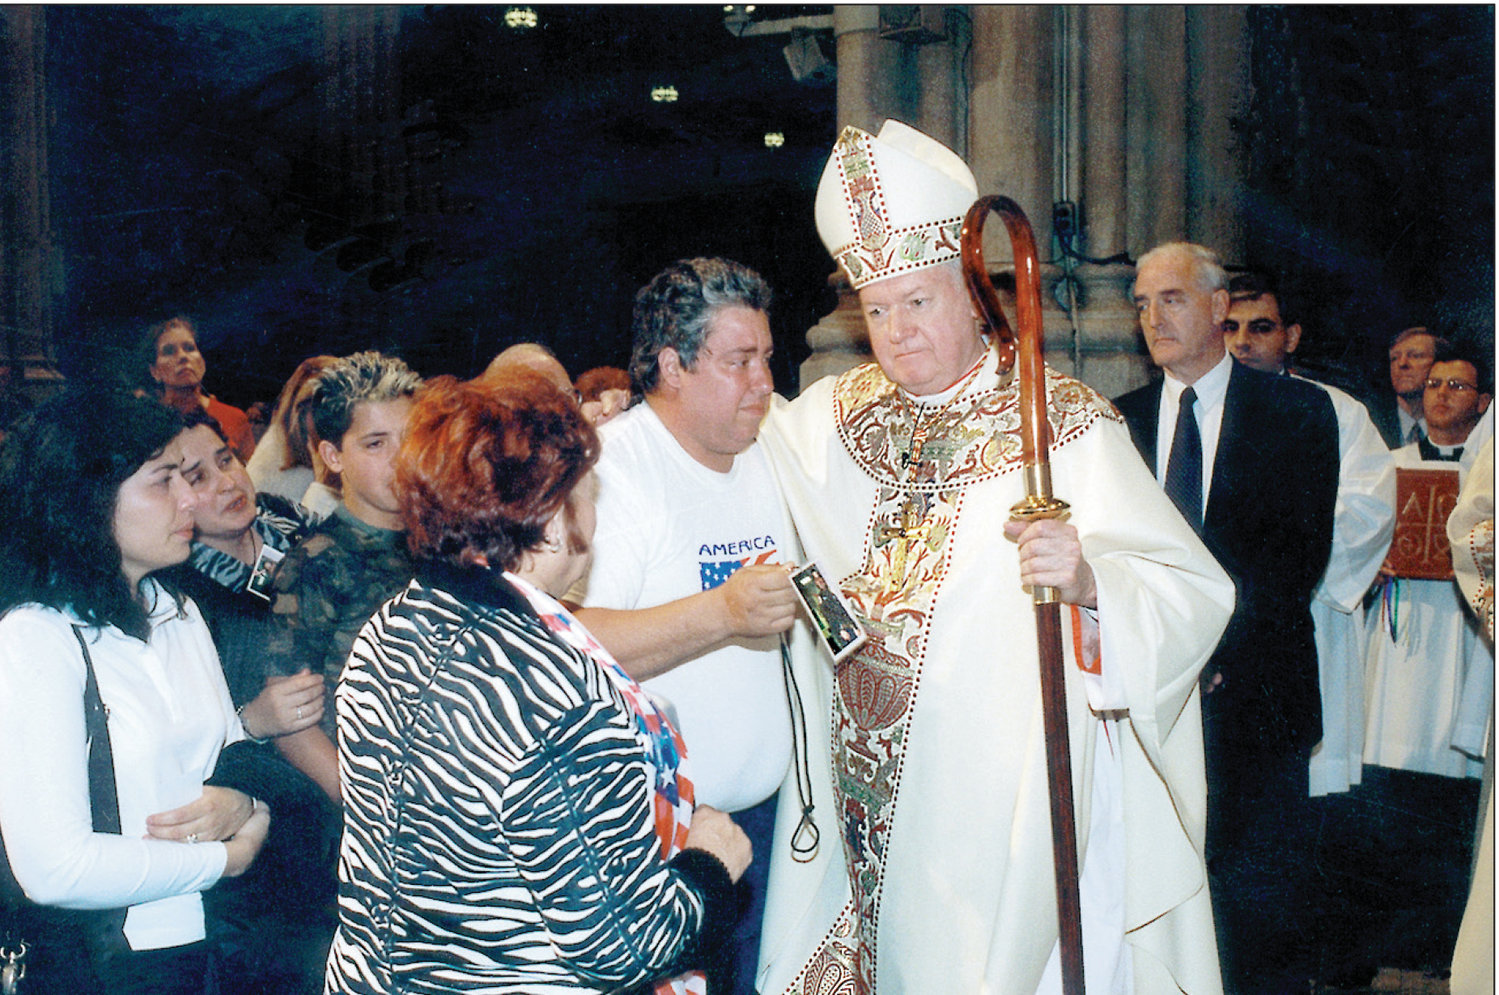 Cardinal Edward Egan comforts the faithful at a Month’s Mind Mass he offered Oct. 11, 2001, at St. Patrick’s Cathedral.